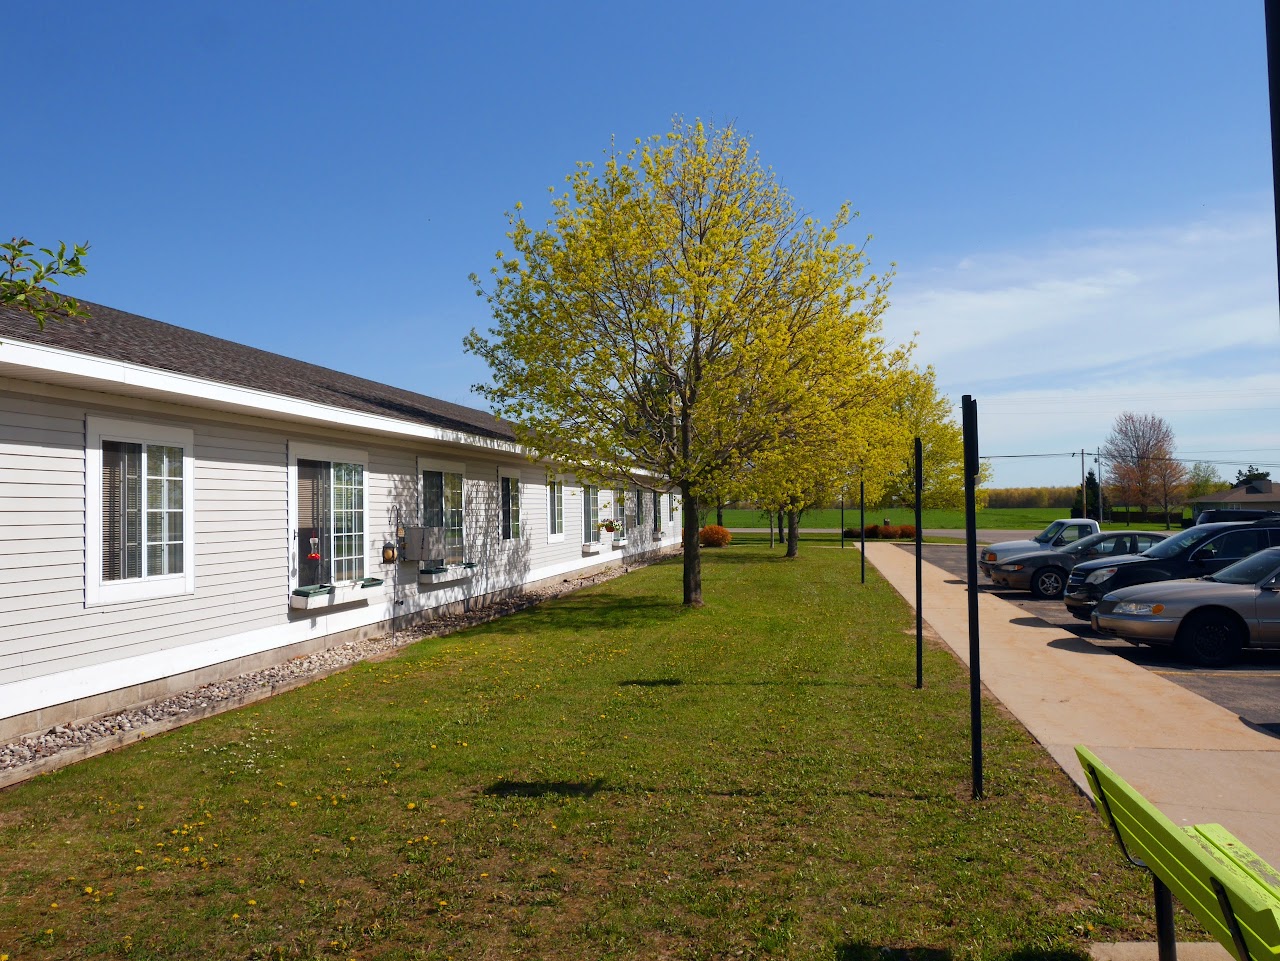 Photo of FIELDSTONE MANOR APTS. Affordable housing located at 6776 STATE ST POSEN, MI 49776